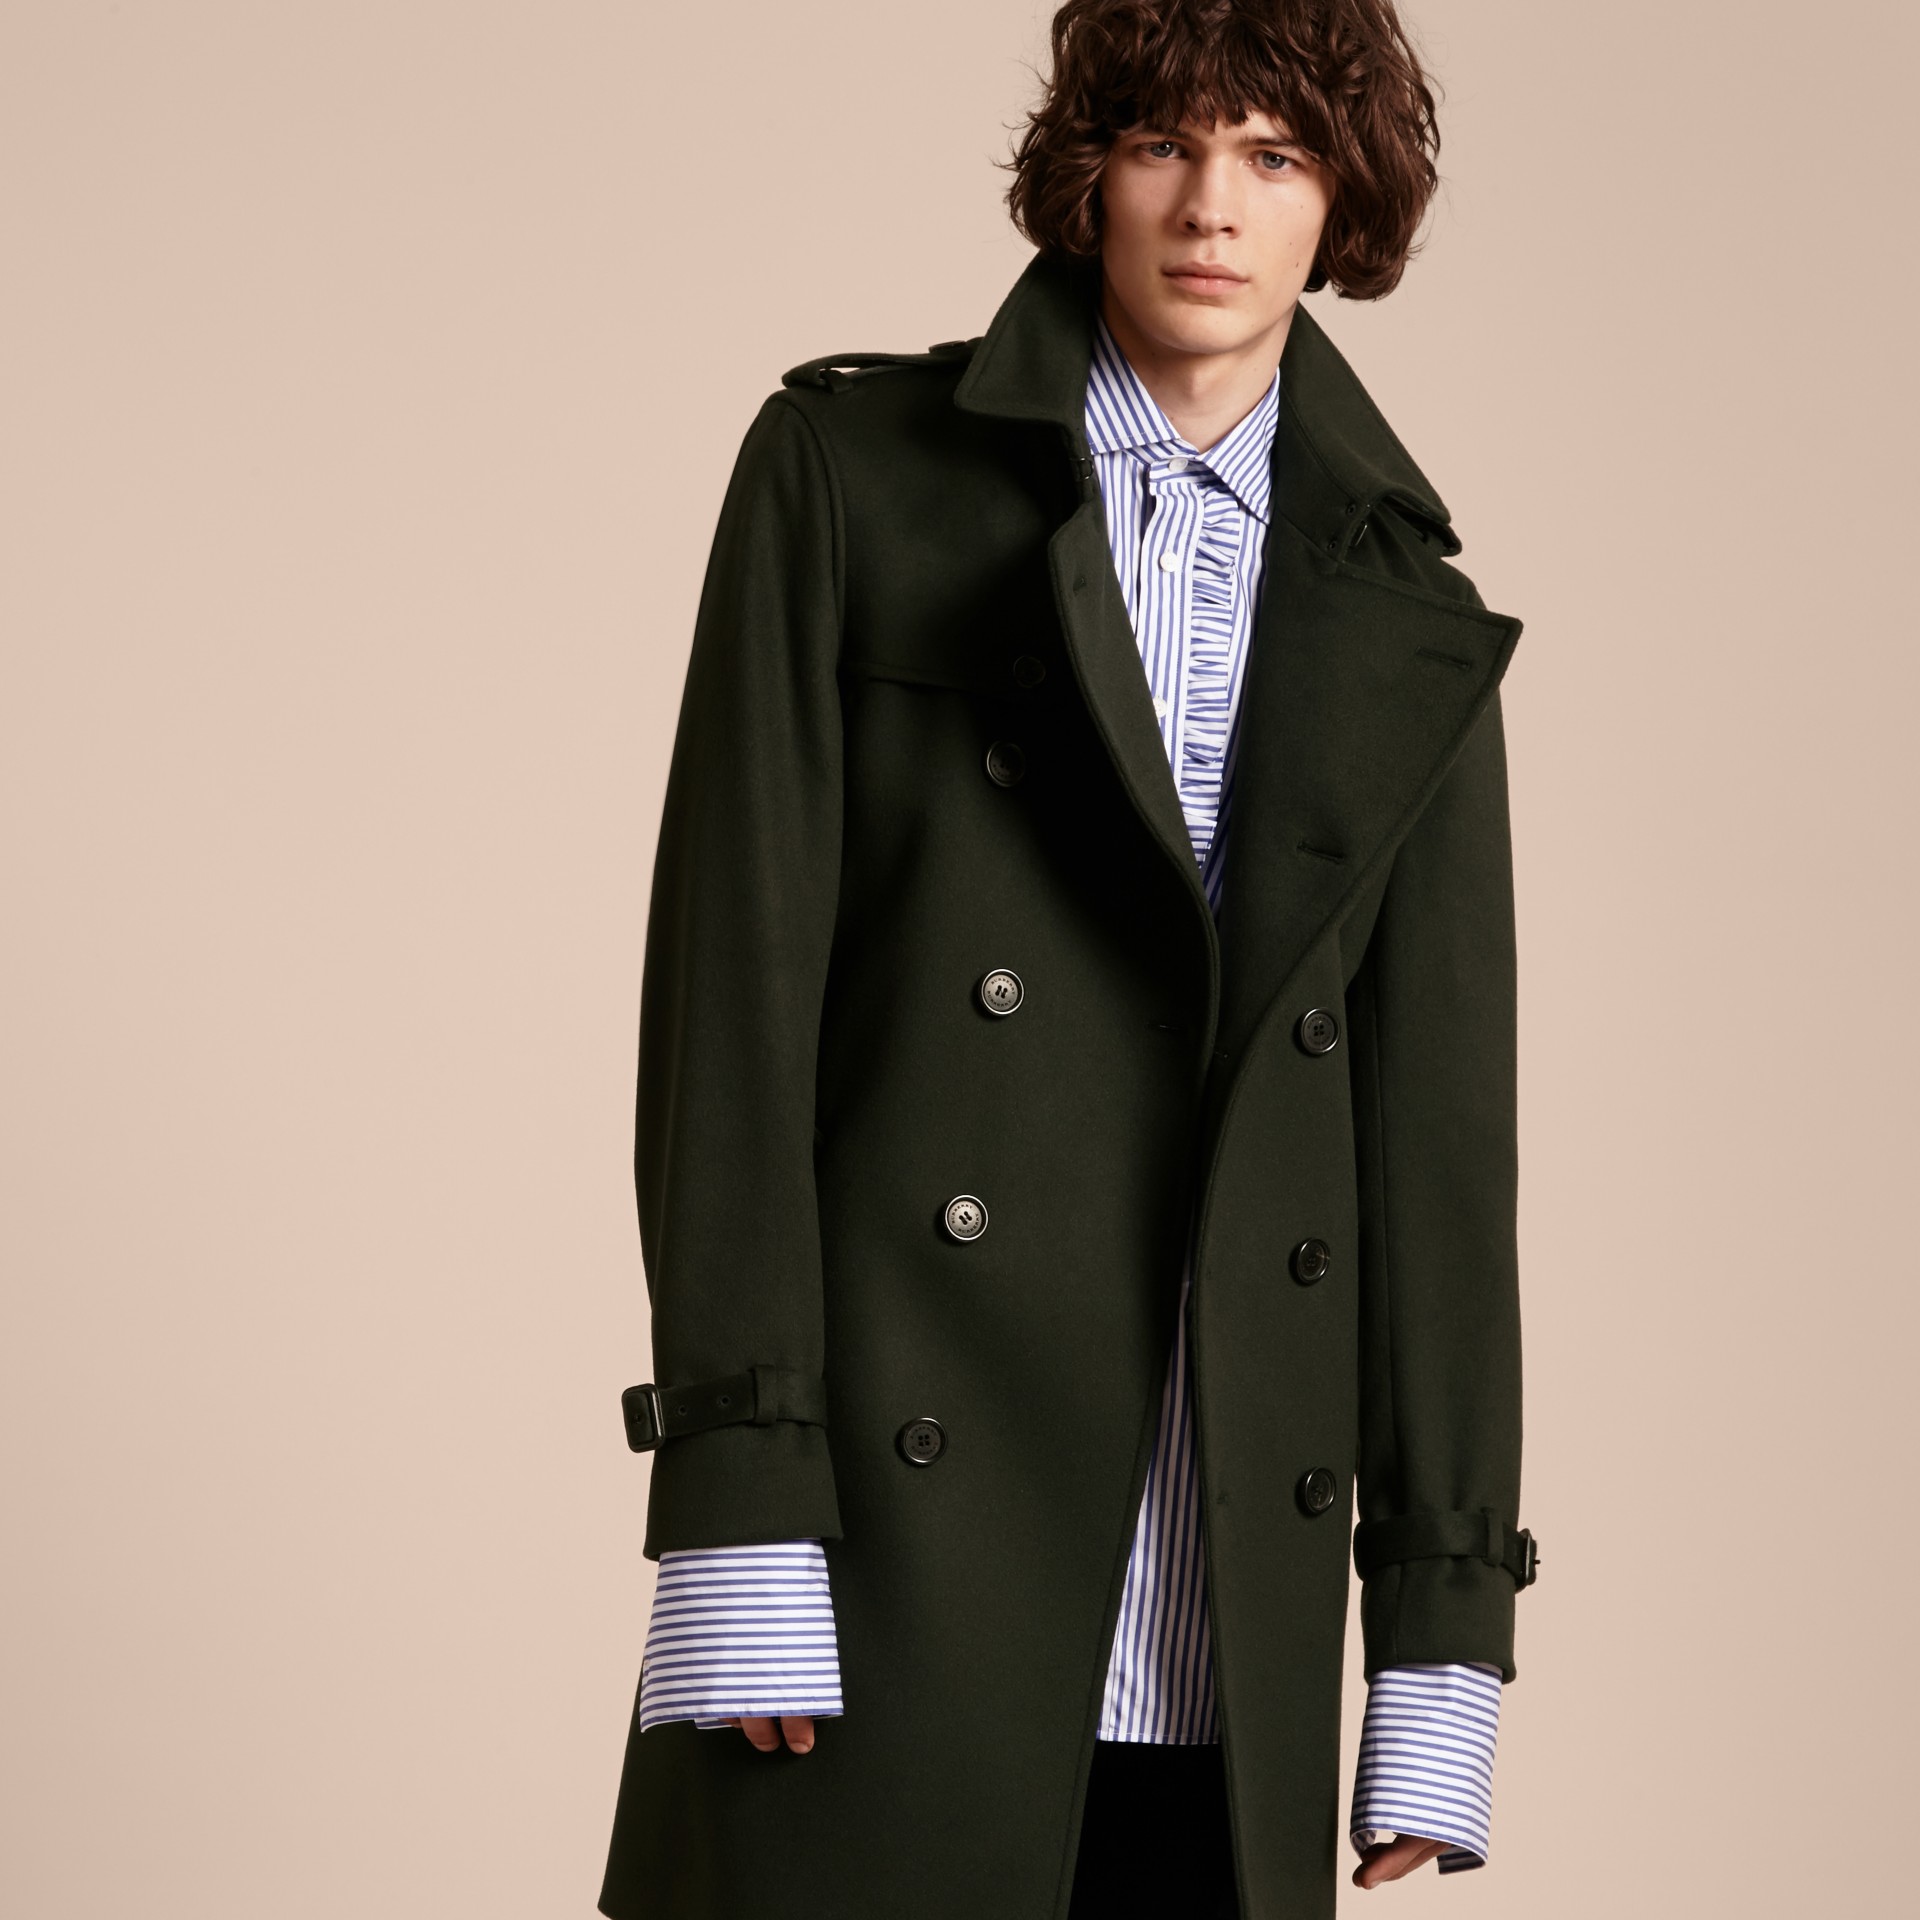 Cashmere Trench Coat in Dark Military Green - Men | Burberry United States